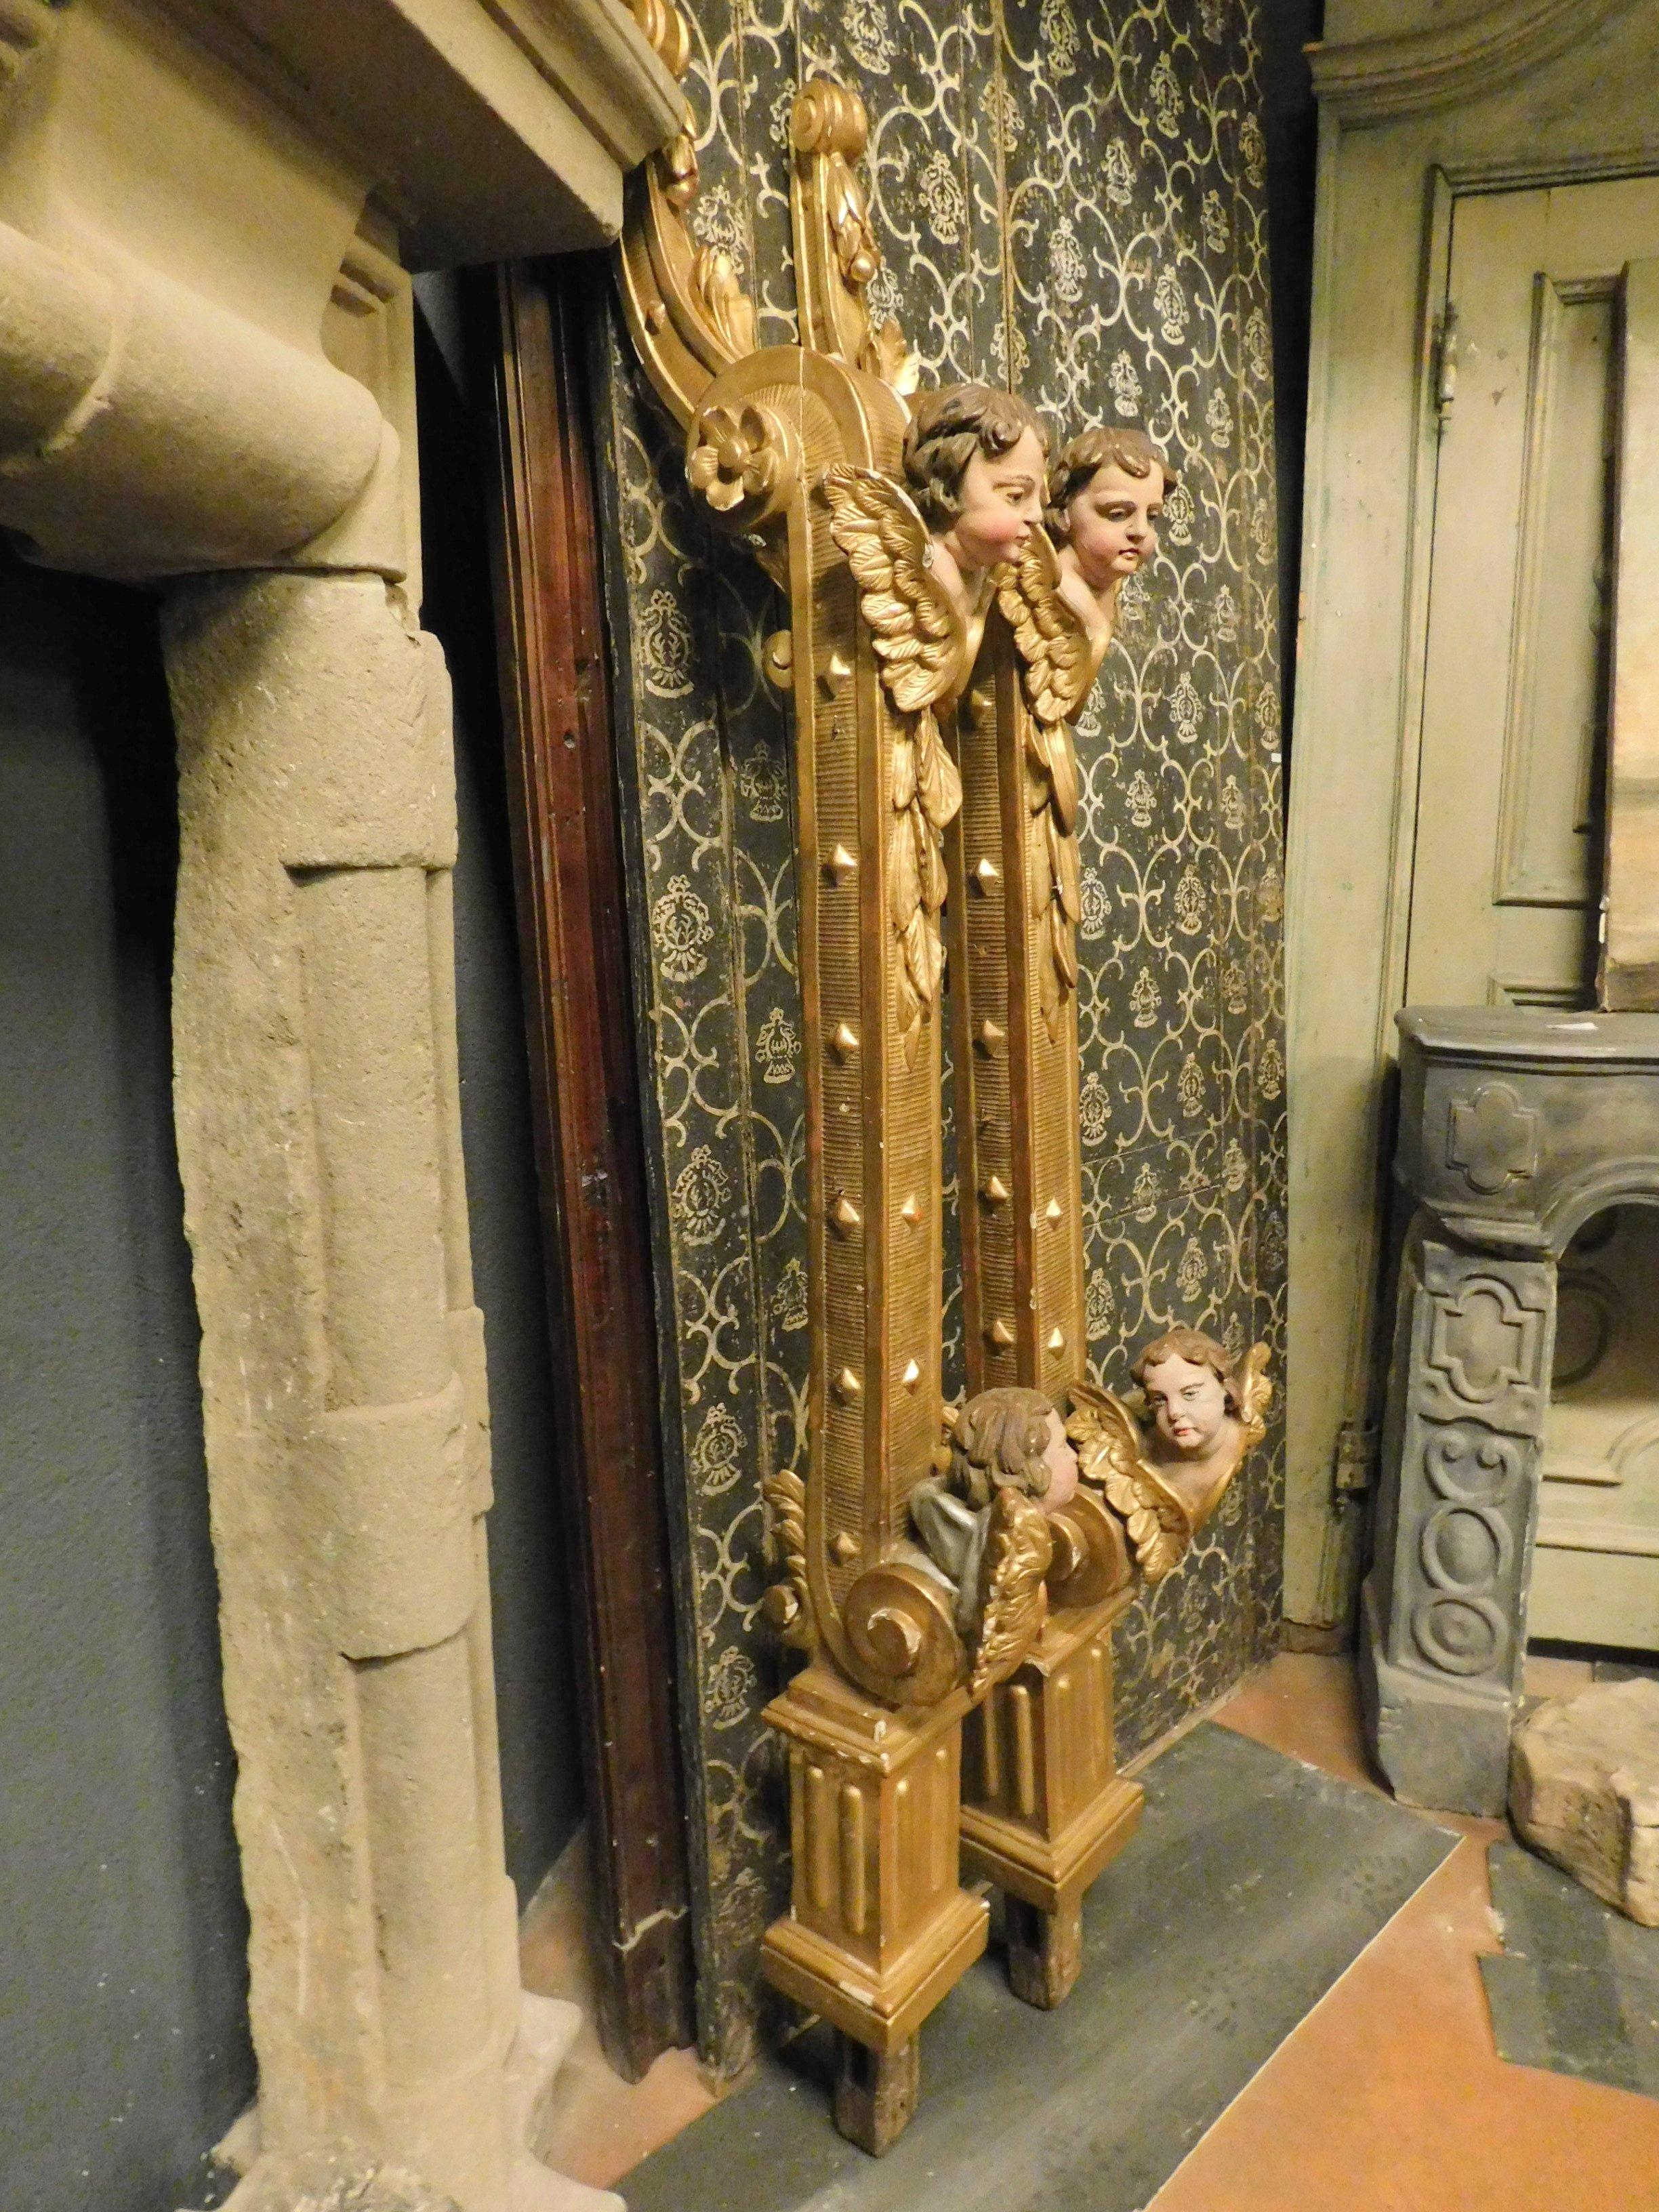 Wood Antique Pair of Gilded Uprights / Columns with Cherubs, 18th Century, Italy